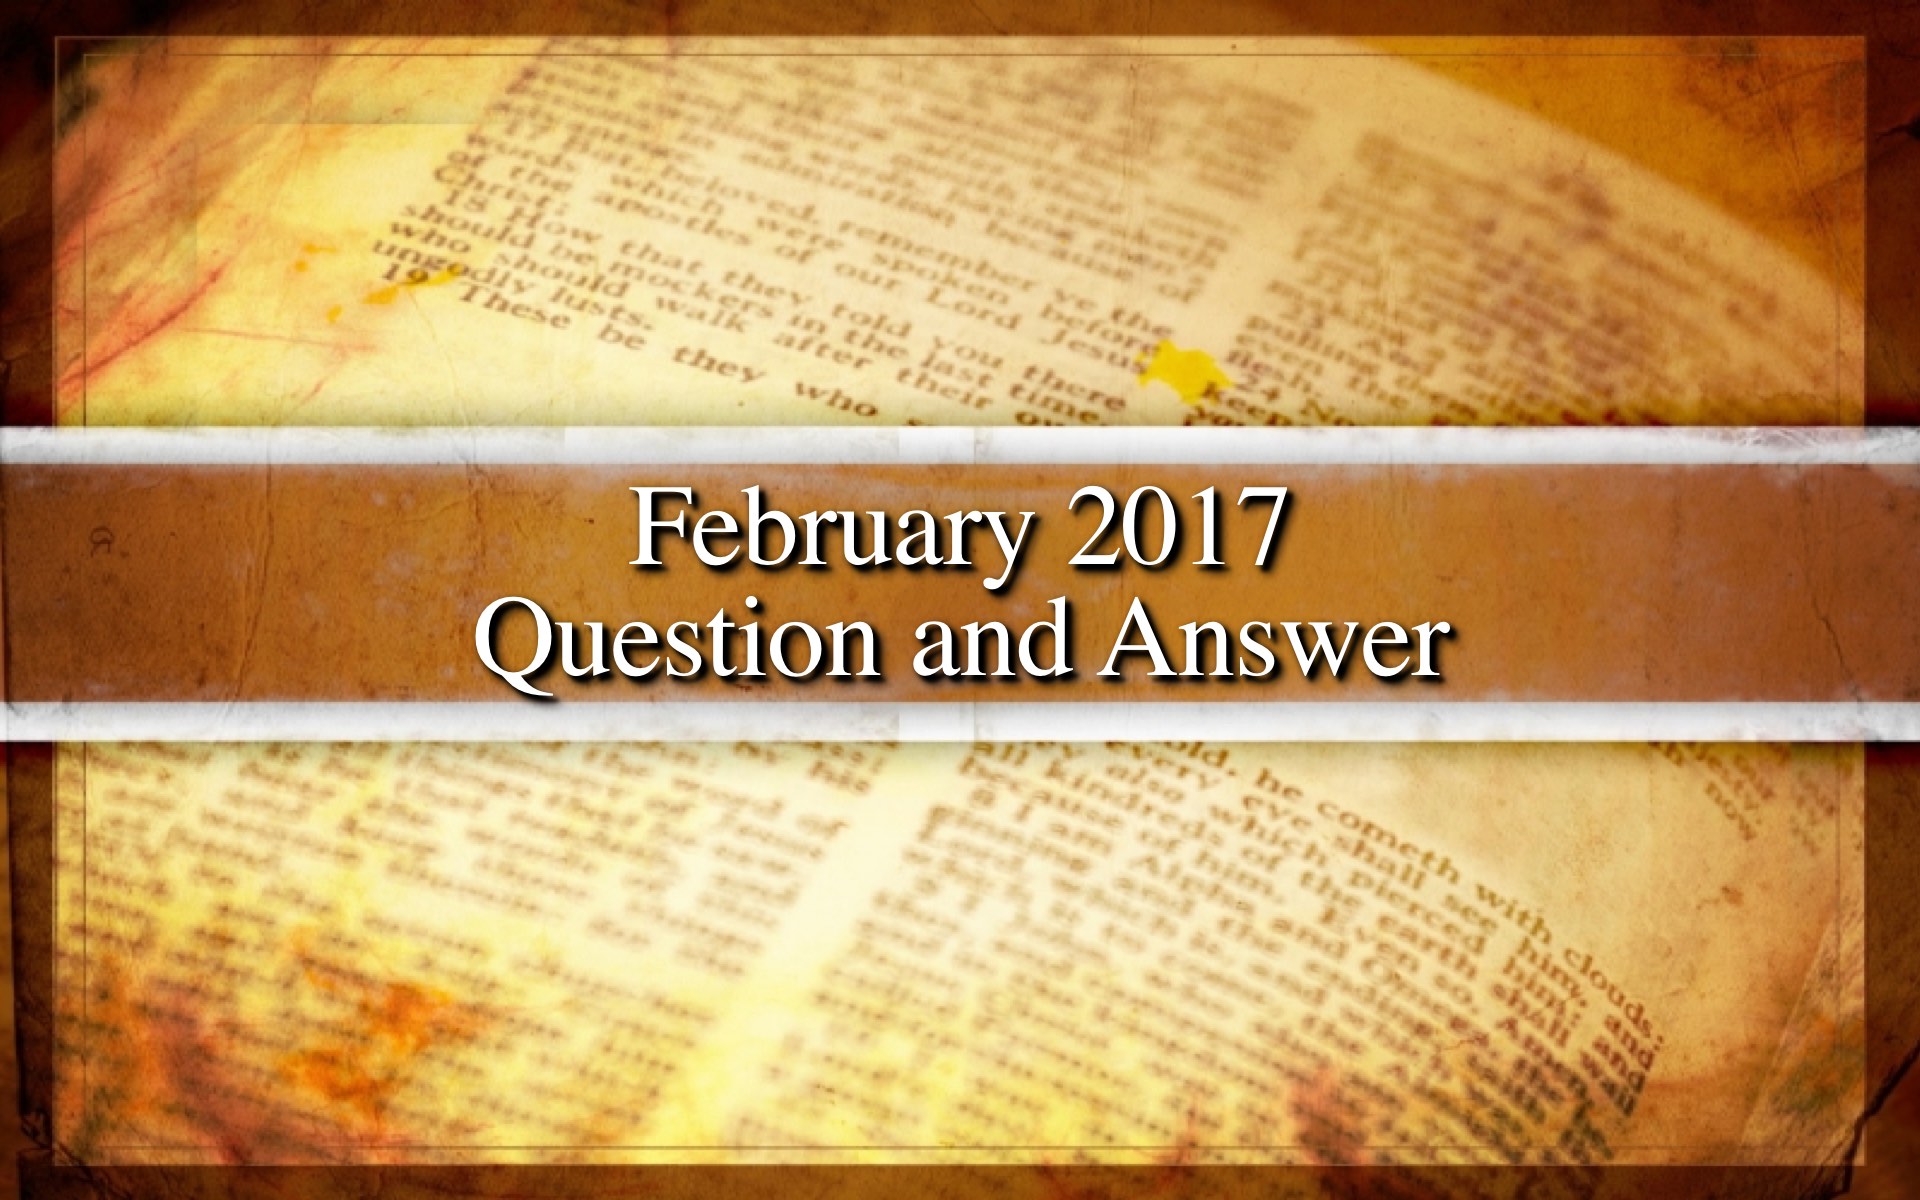 February 2017 Question and Answer